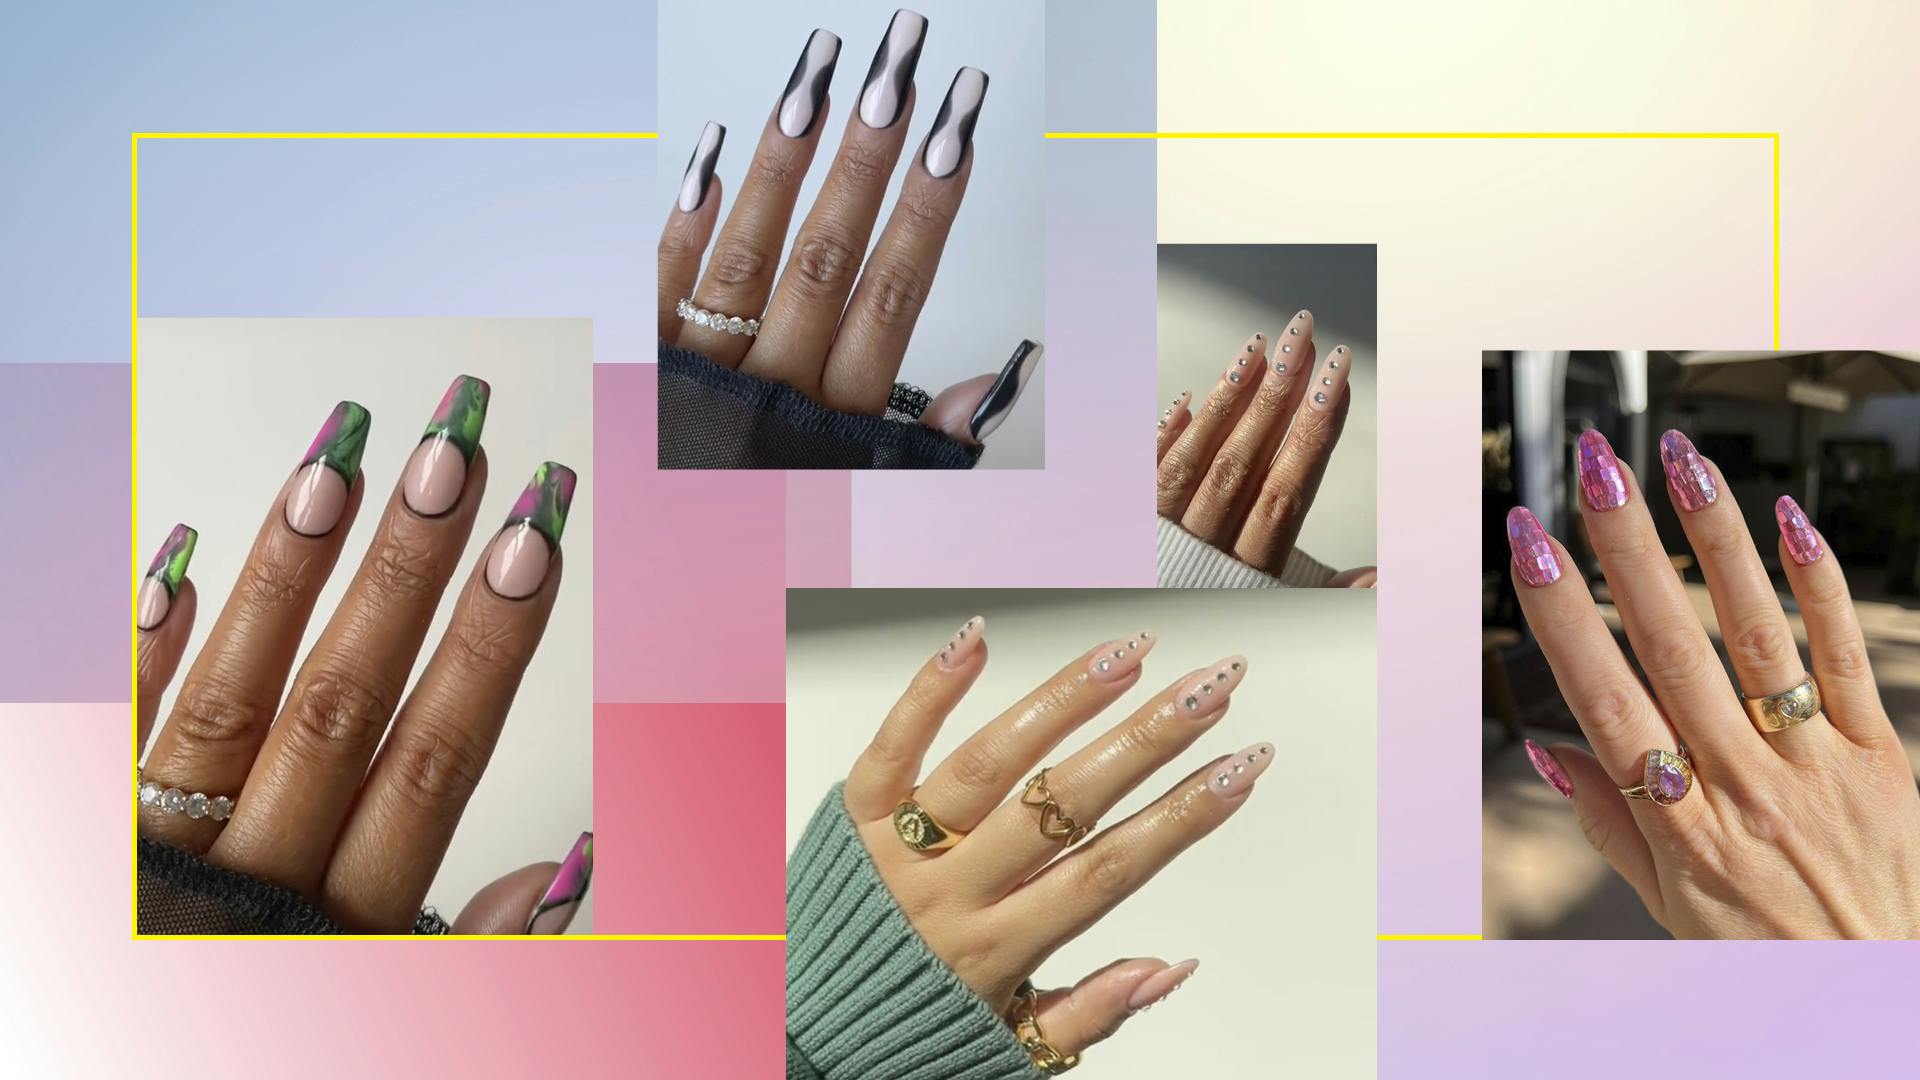 Who is the mastermind behind 'Euphoria's nail-art designs?